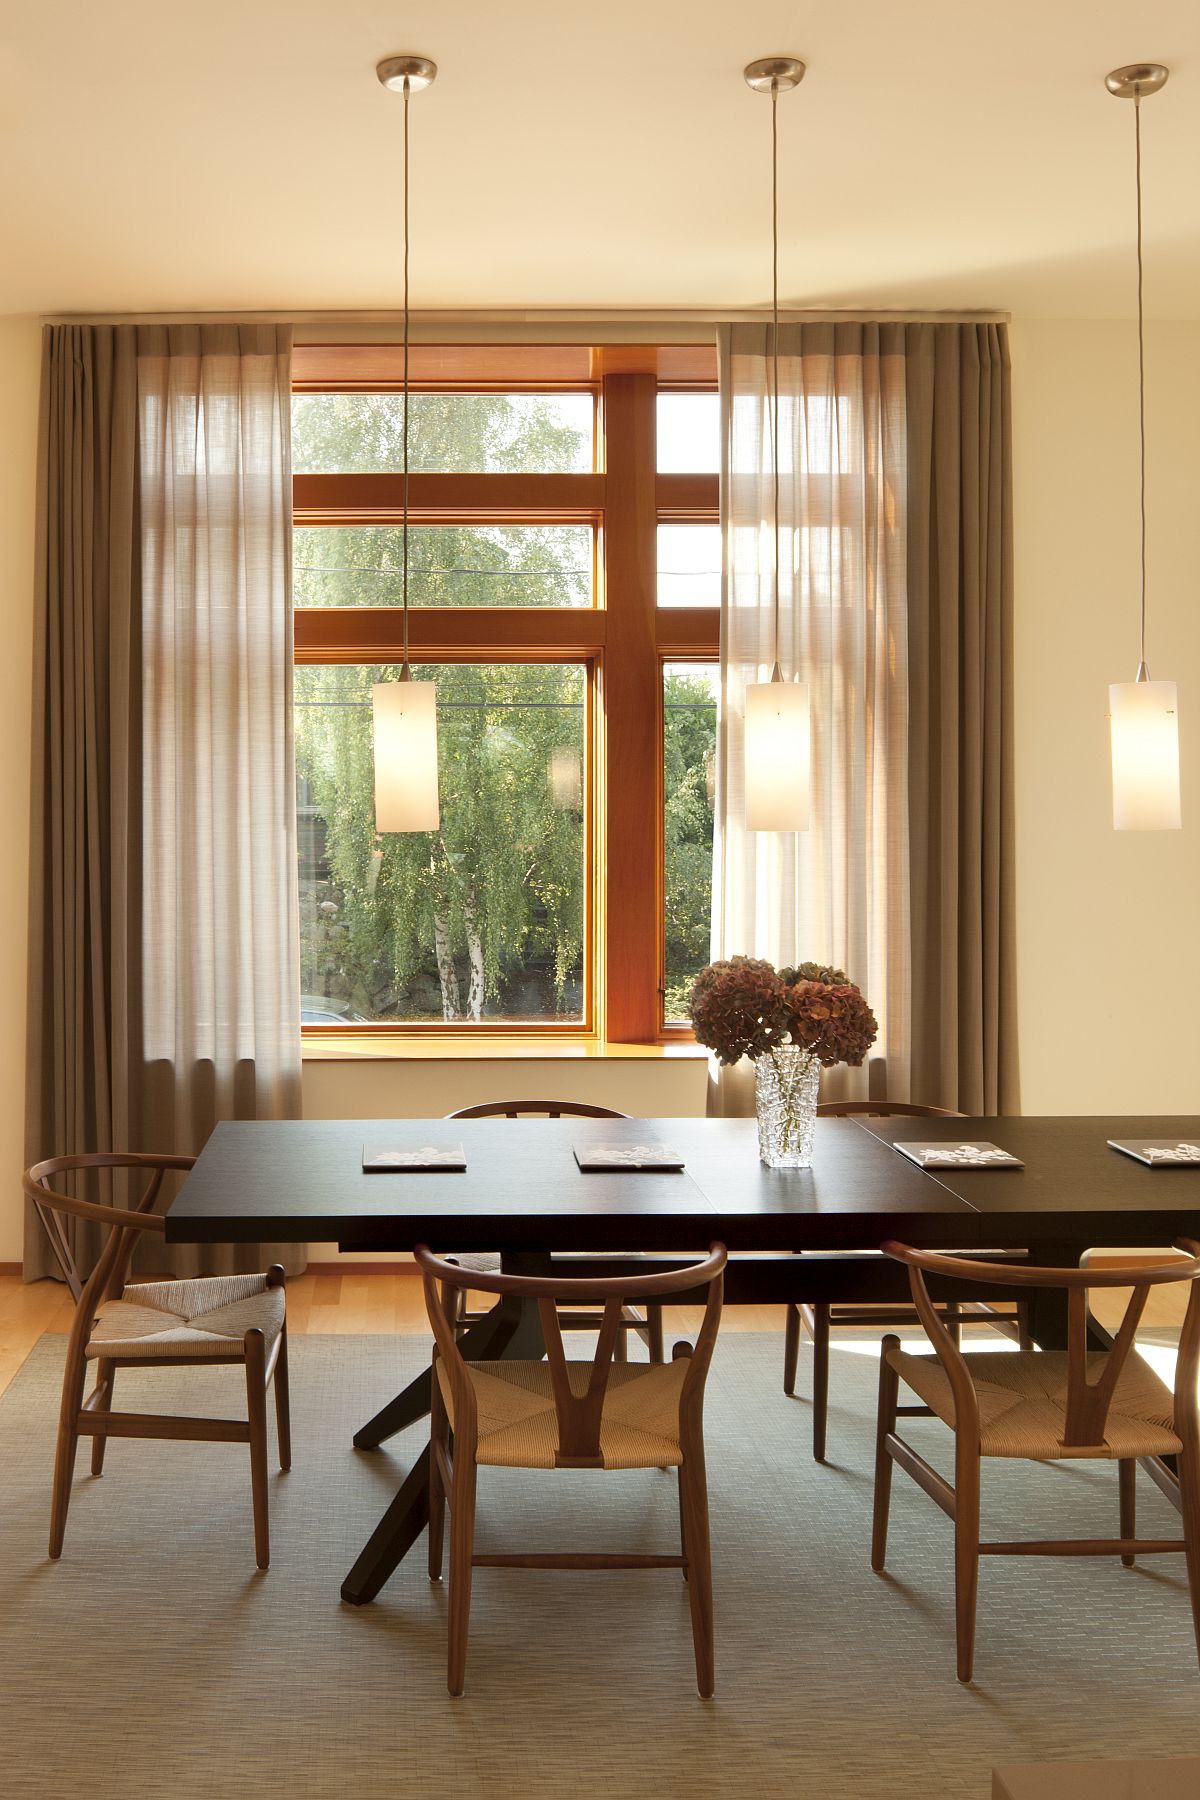 Modern-formal-dining-area-in-beige-with-lovely-drapes-and-trio-of-pendant-lights-41073